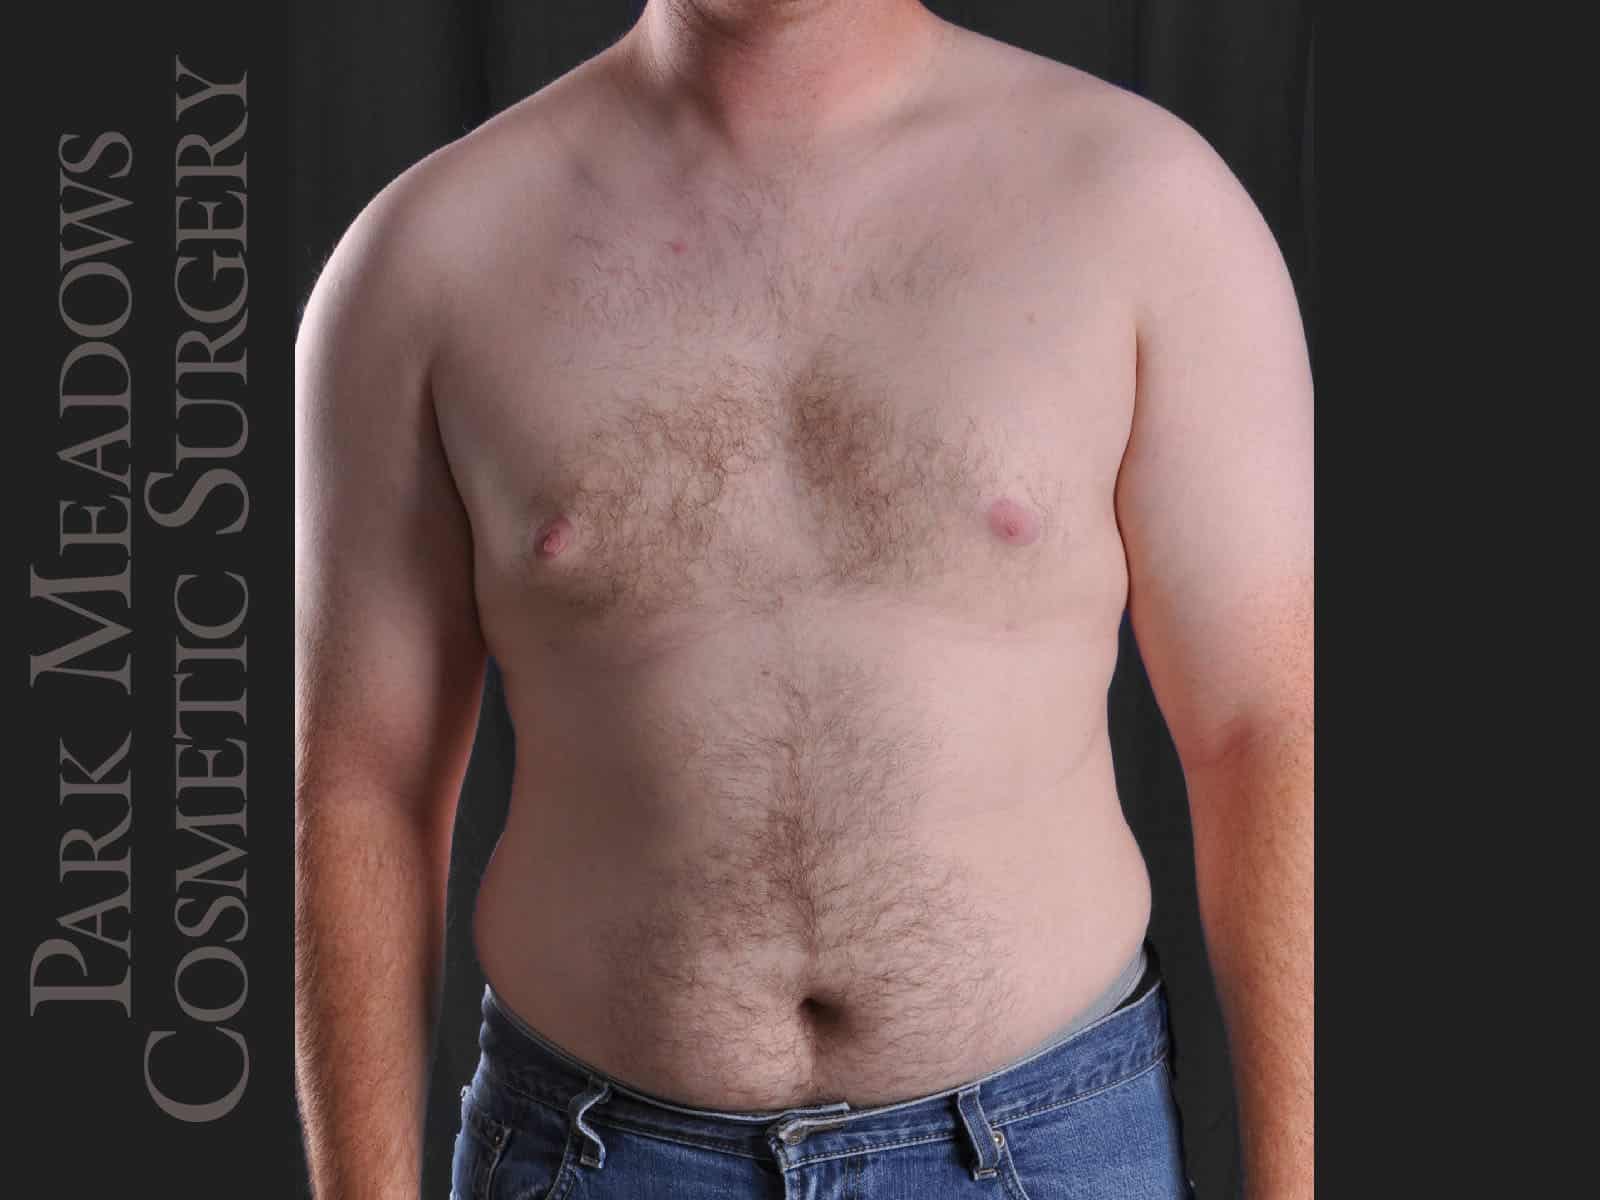 Gynecomastia – Direct Excision and Liposuction